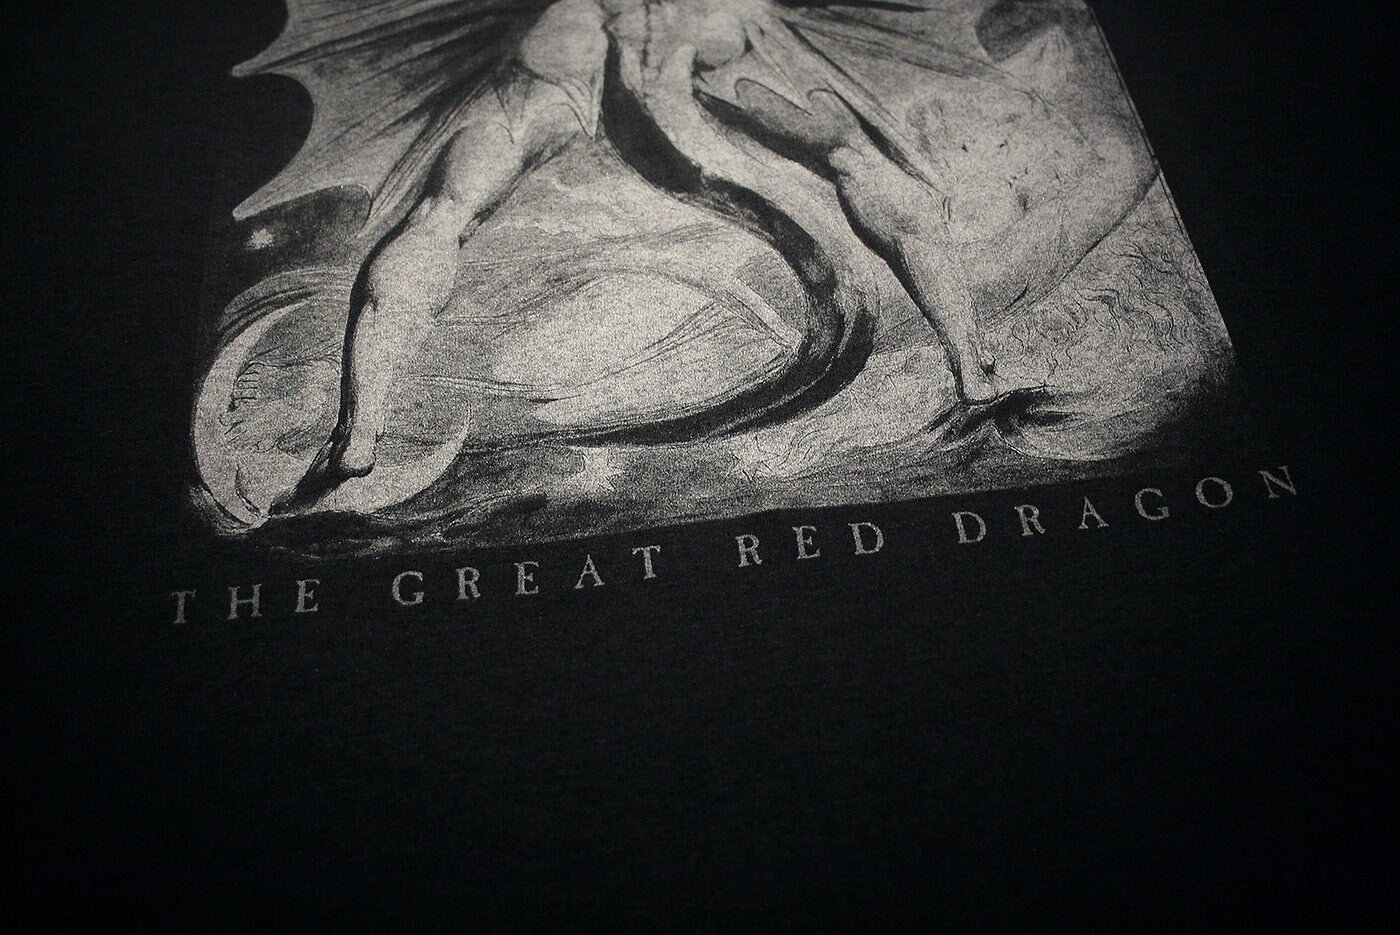 The Great Red Dragon by William Blake - T-shirt